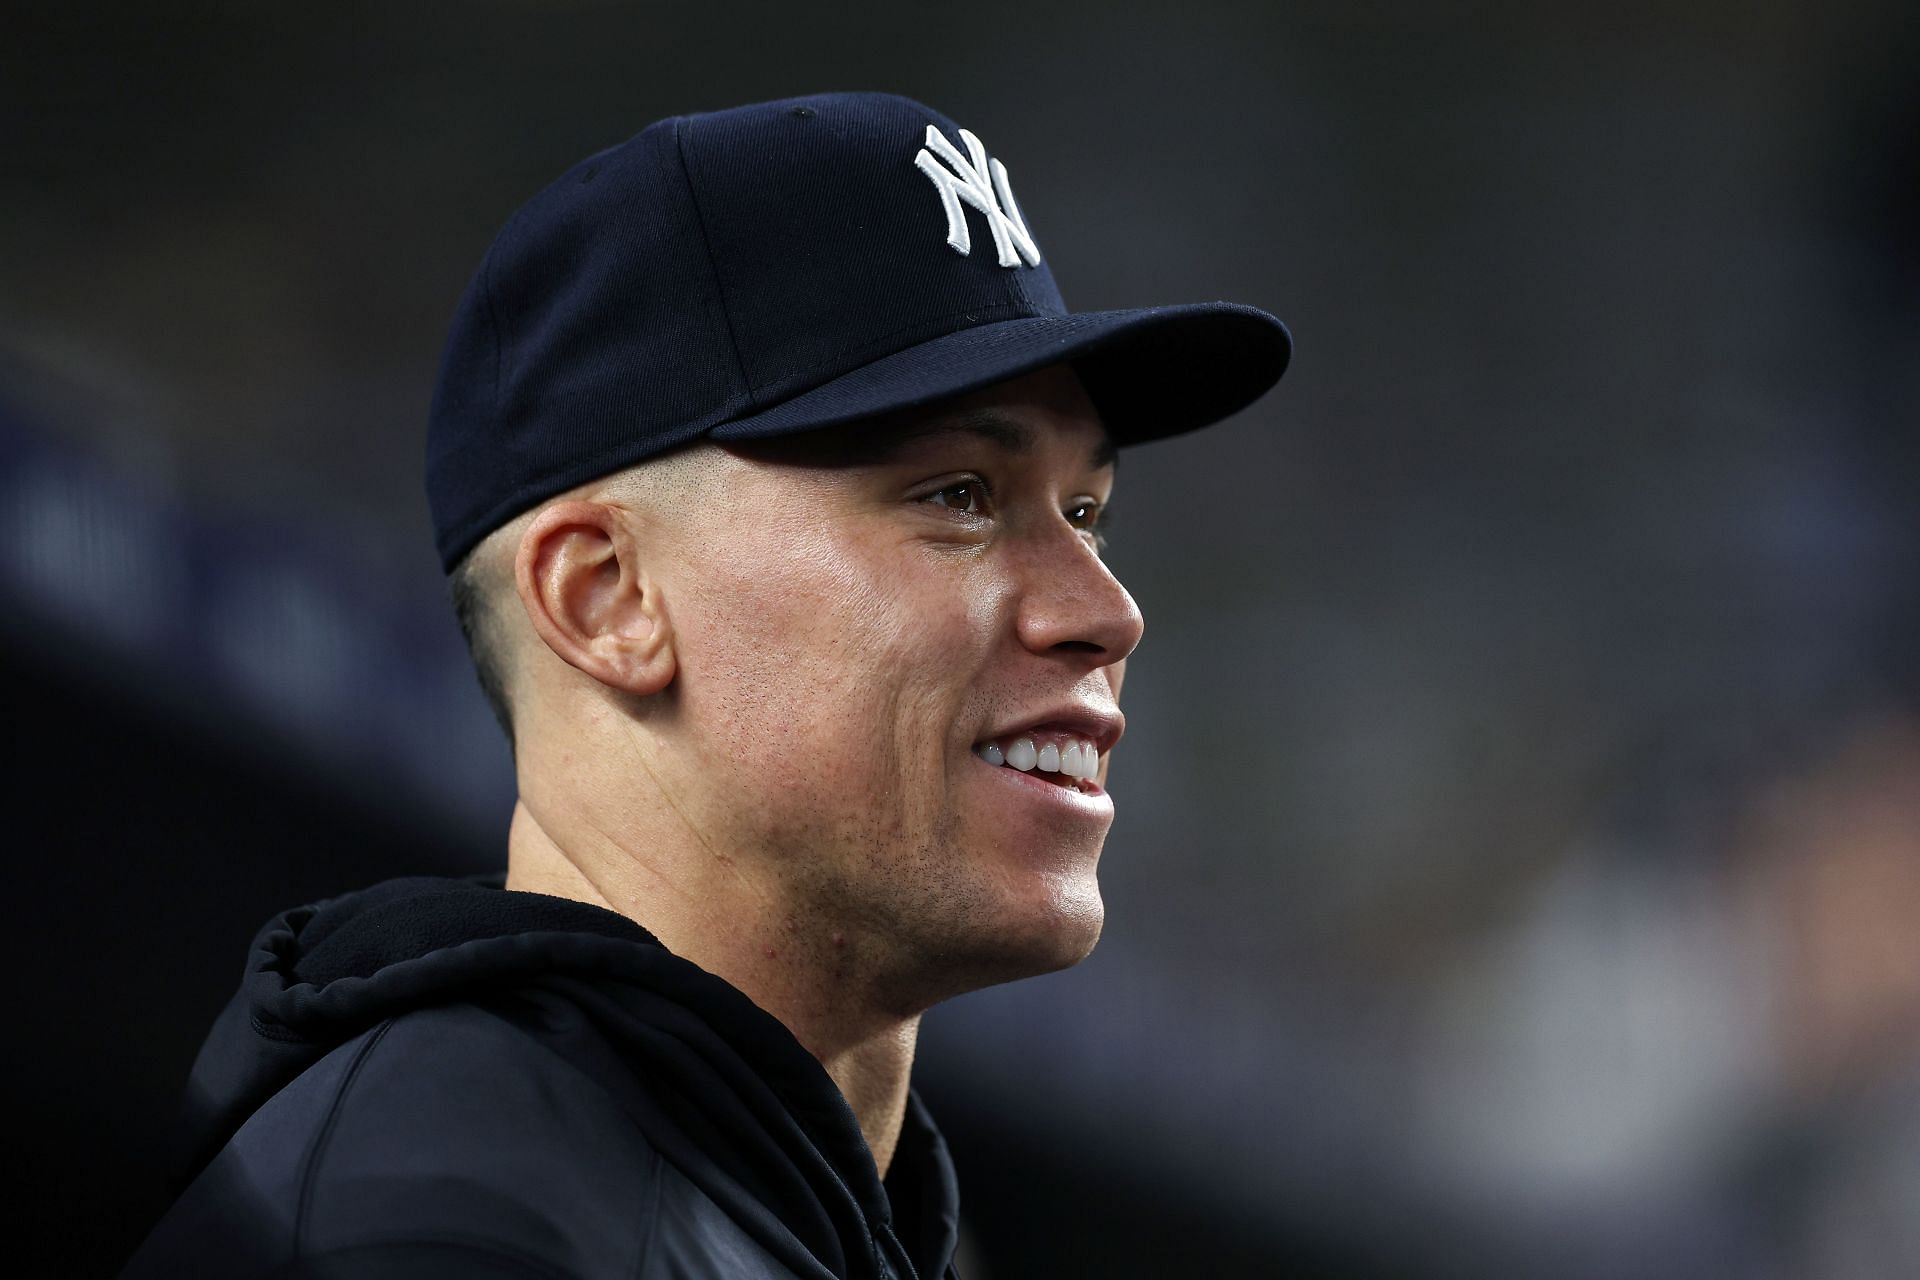 Aaron Judge of the New York Yankees watches from the dugout